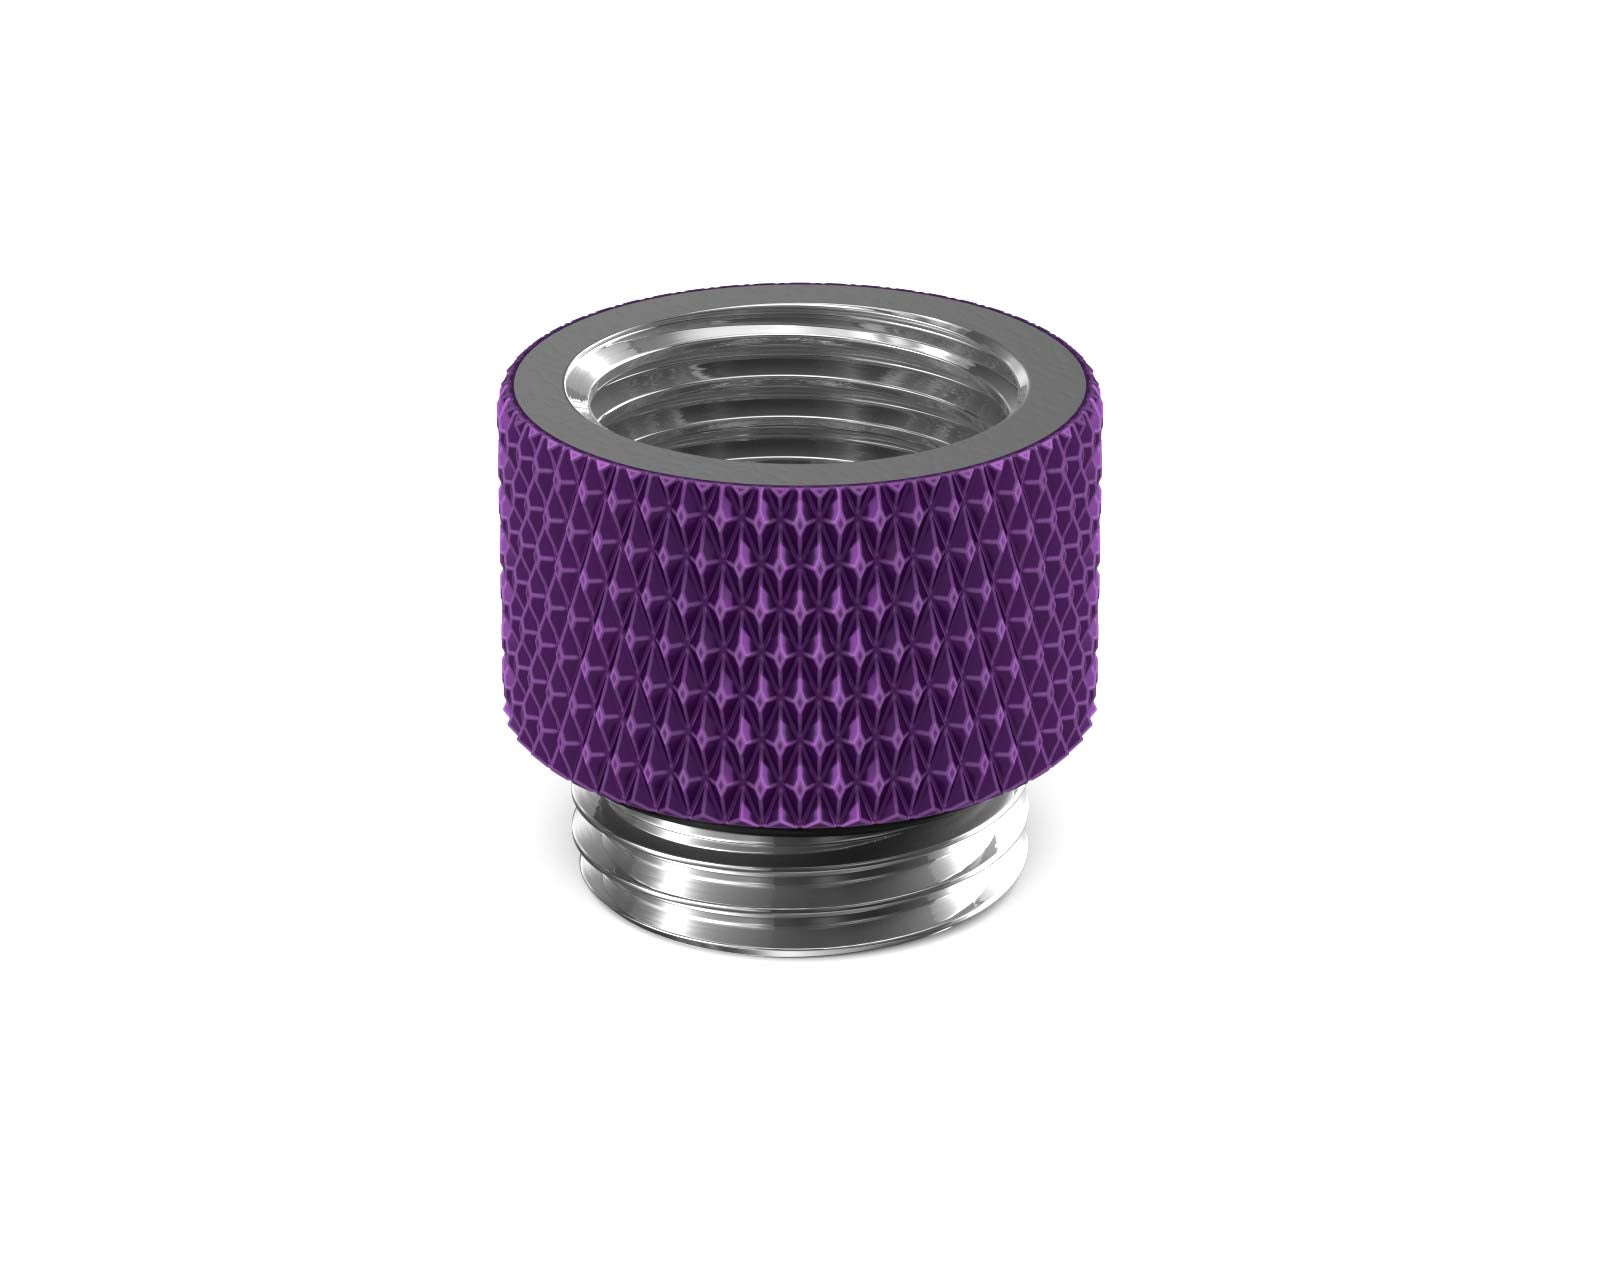 PrimoChill Male to Female G 1/4in. 10mm SX Extension Coupler - PrimoChill - KEEPING IT COOL Candy Purple